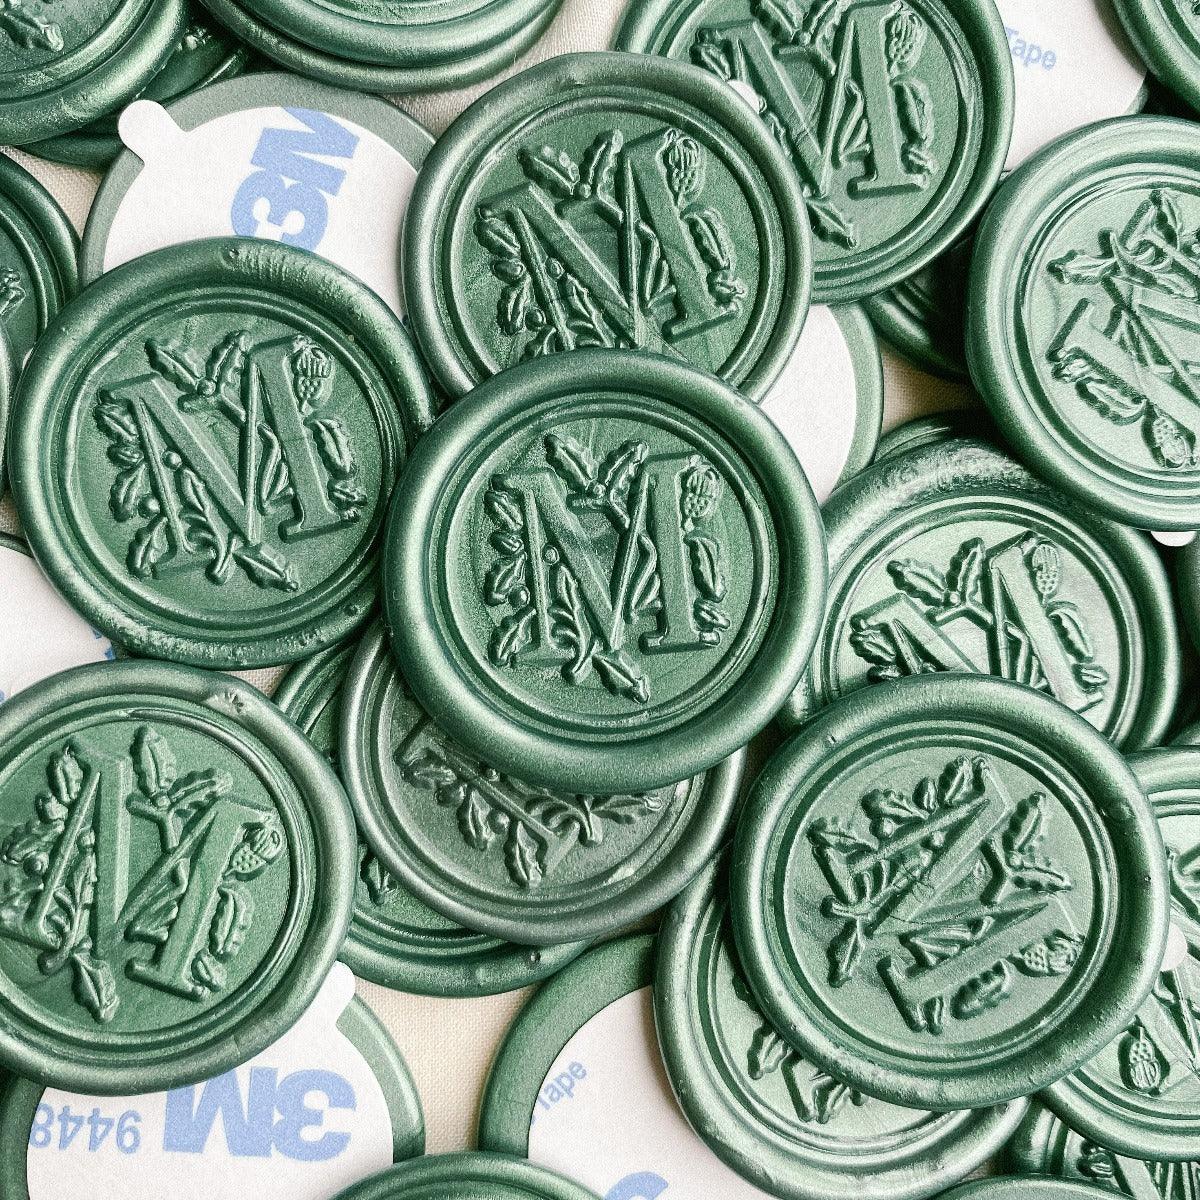 Letter M wax seals in Metallic pine colour with wax seal adhesives attached.